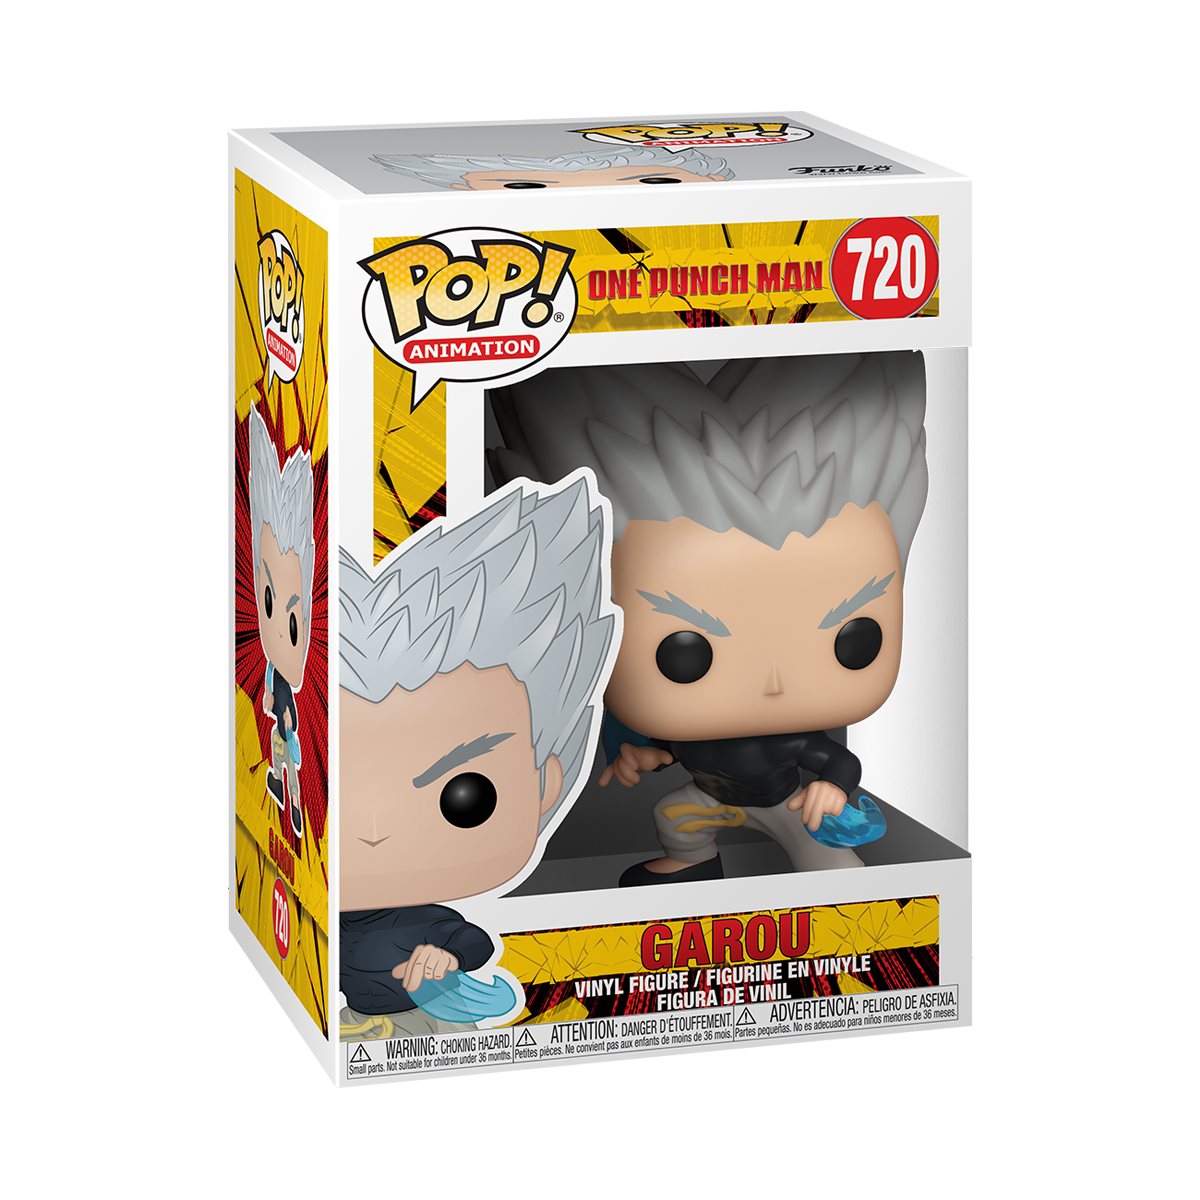 one punch man funko pop exclusive